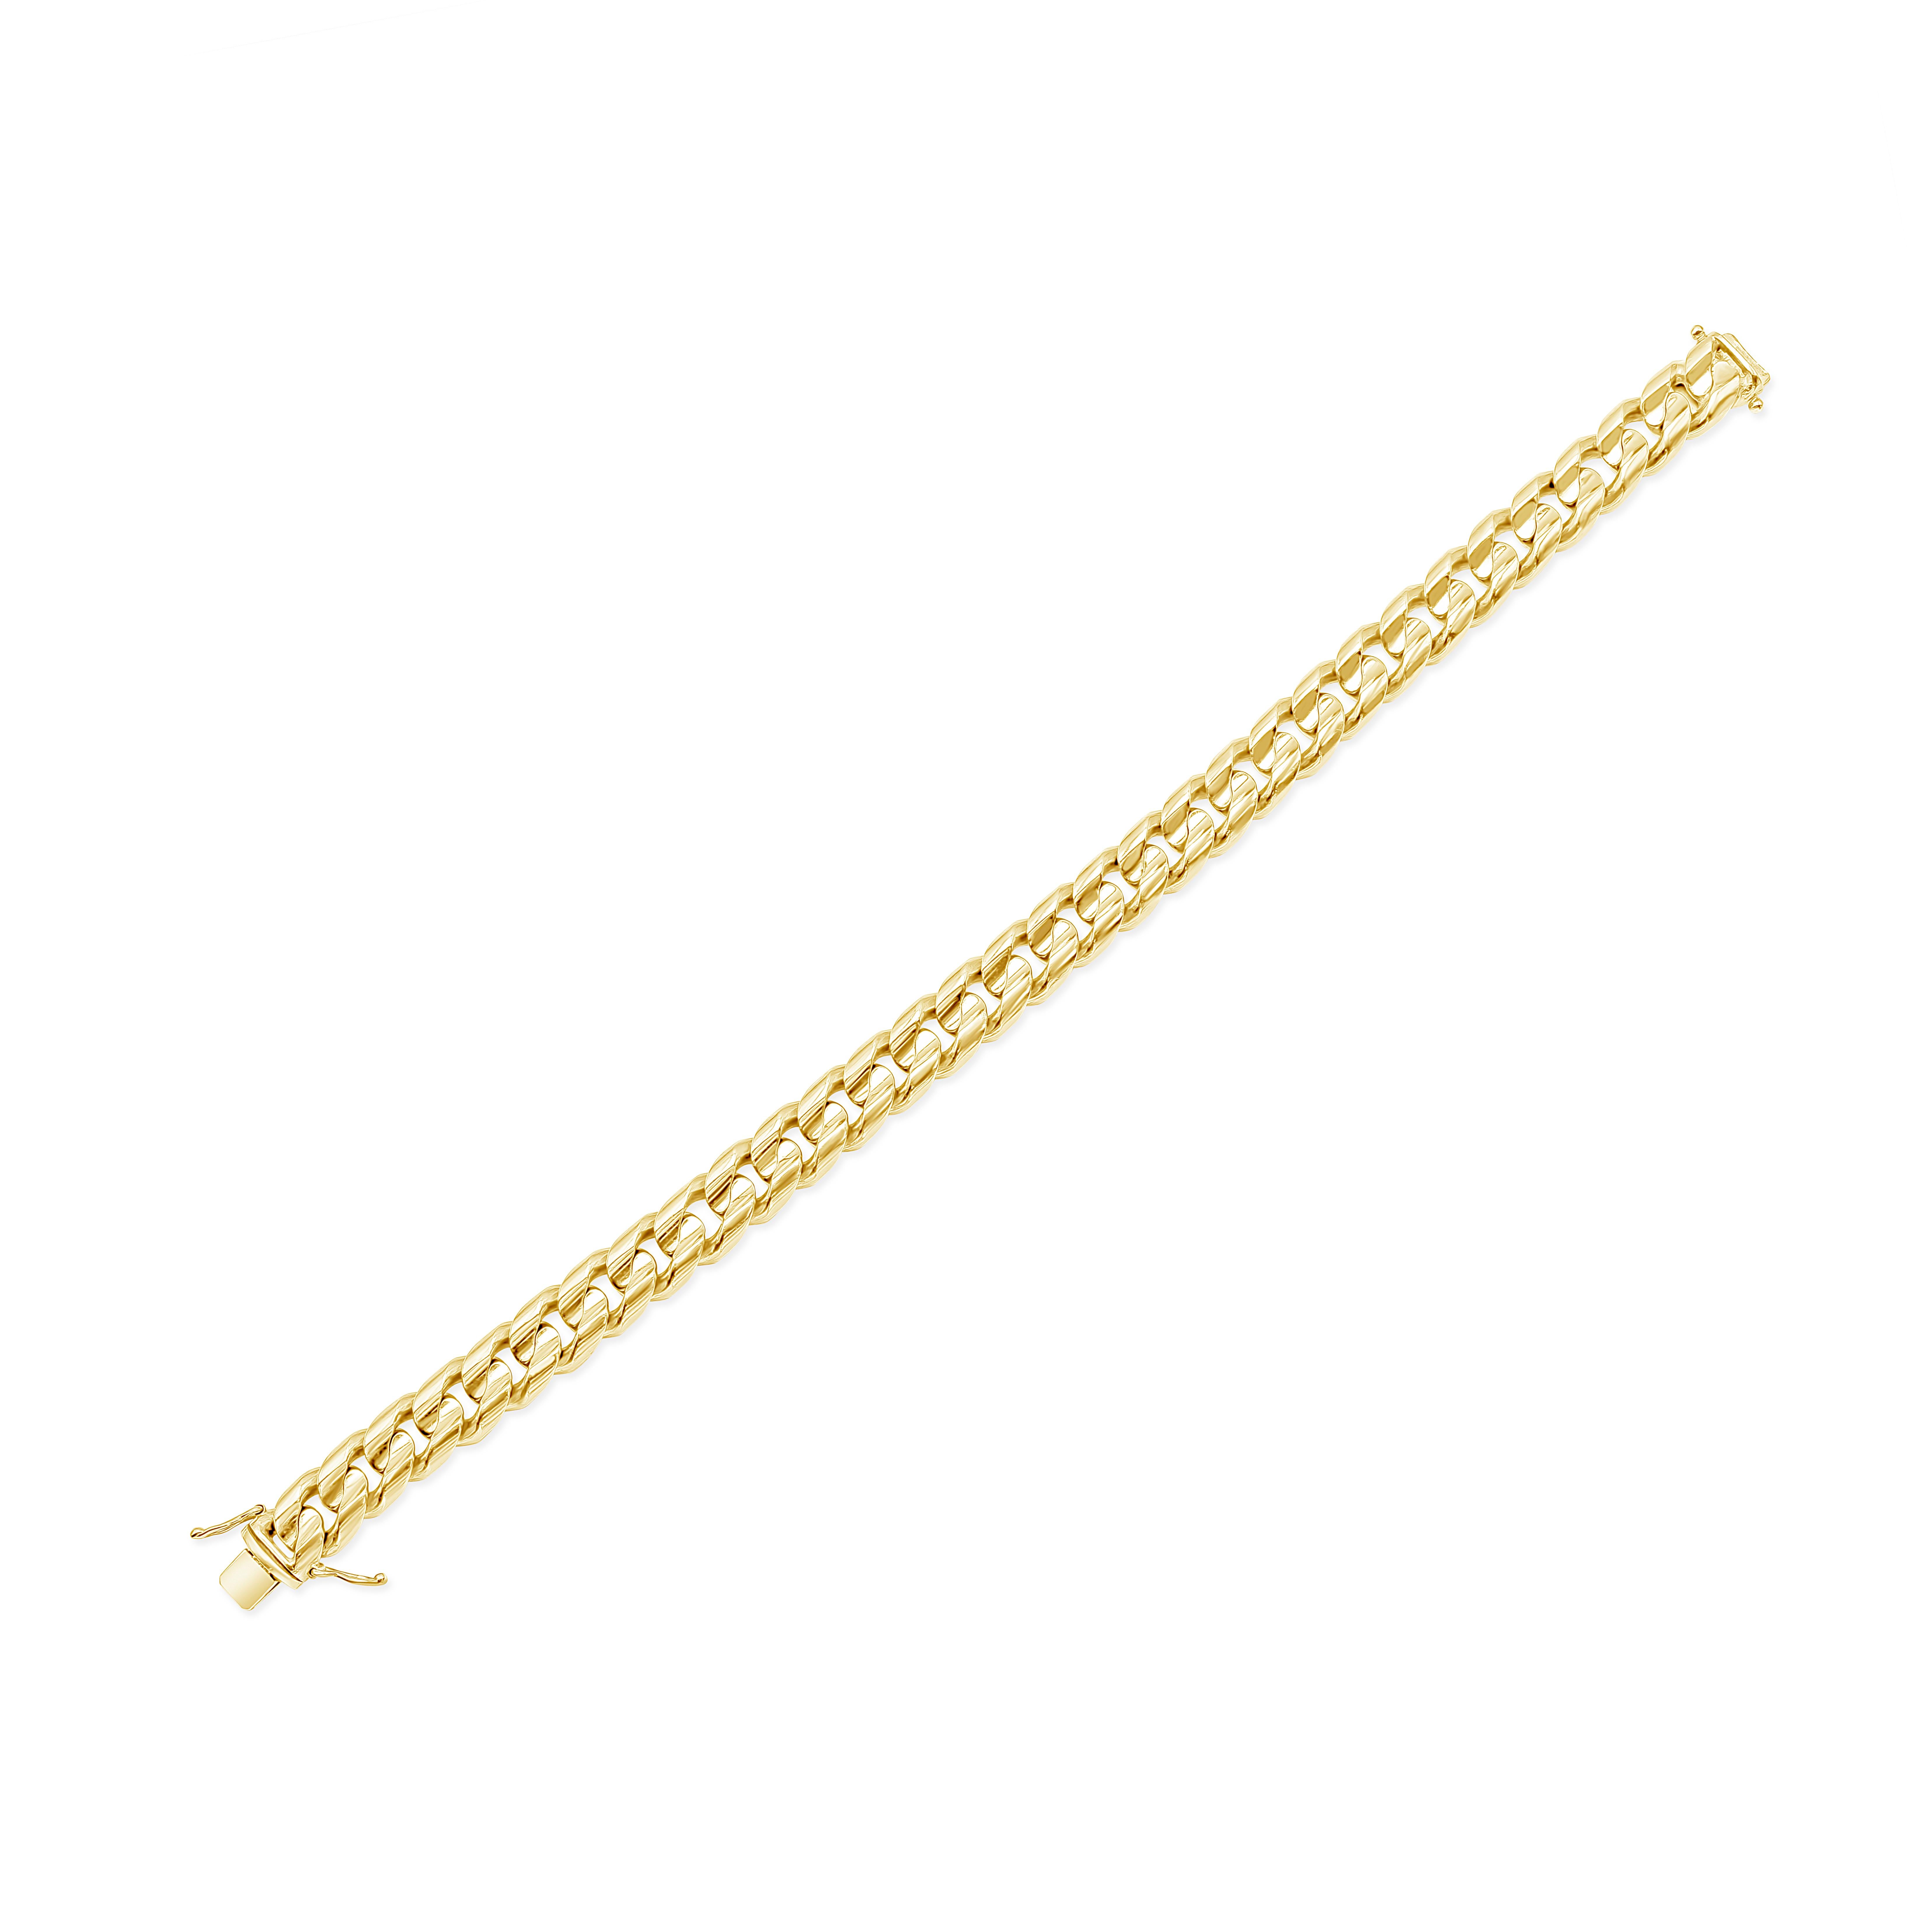 A classic cuban link chain Made with 18K Yellow Gold. 64 grams in weight and 8.40 inches in length. Made in Italy. 

9.20mm wide
3.60mm high

Style available in different price ranges. Prices are based on your selection. Please contact us for more